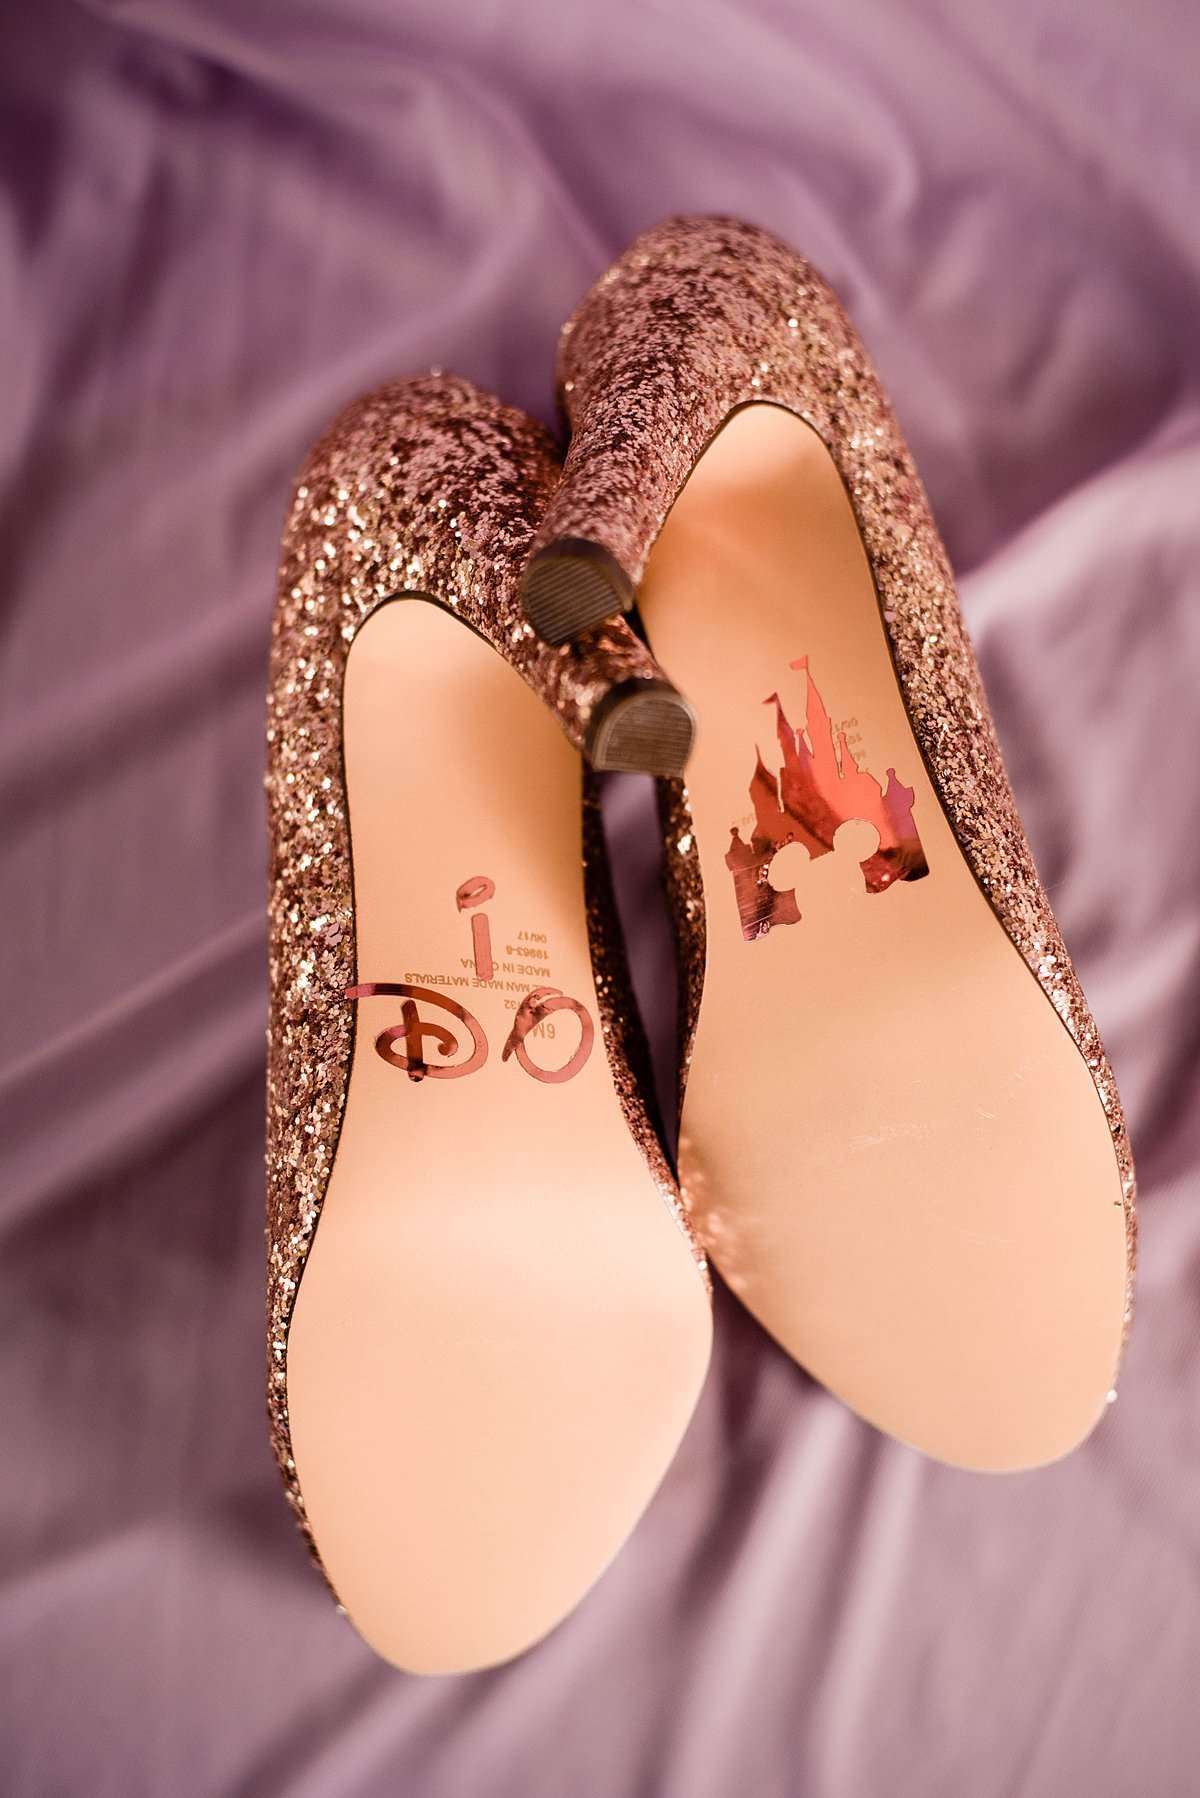 Rose Gold wedding shoes with Disney Castle and I Do on the bottoms